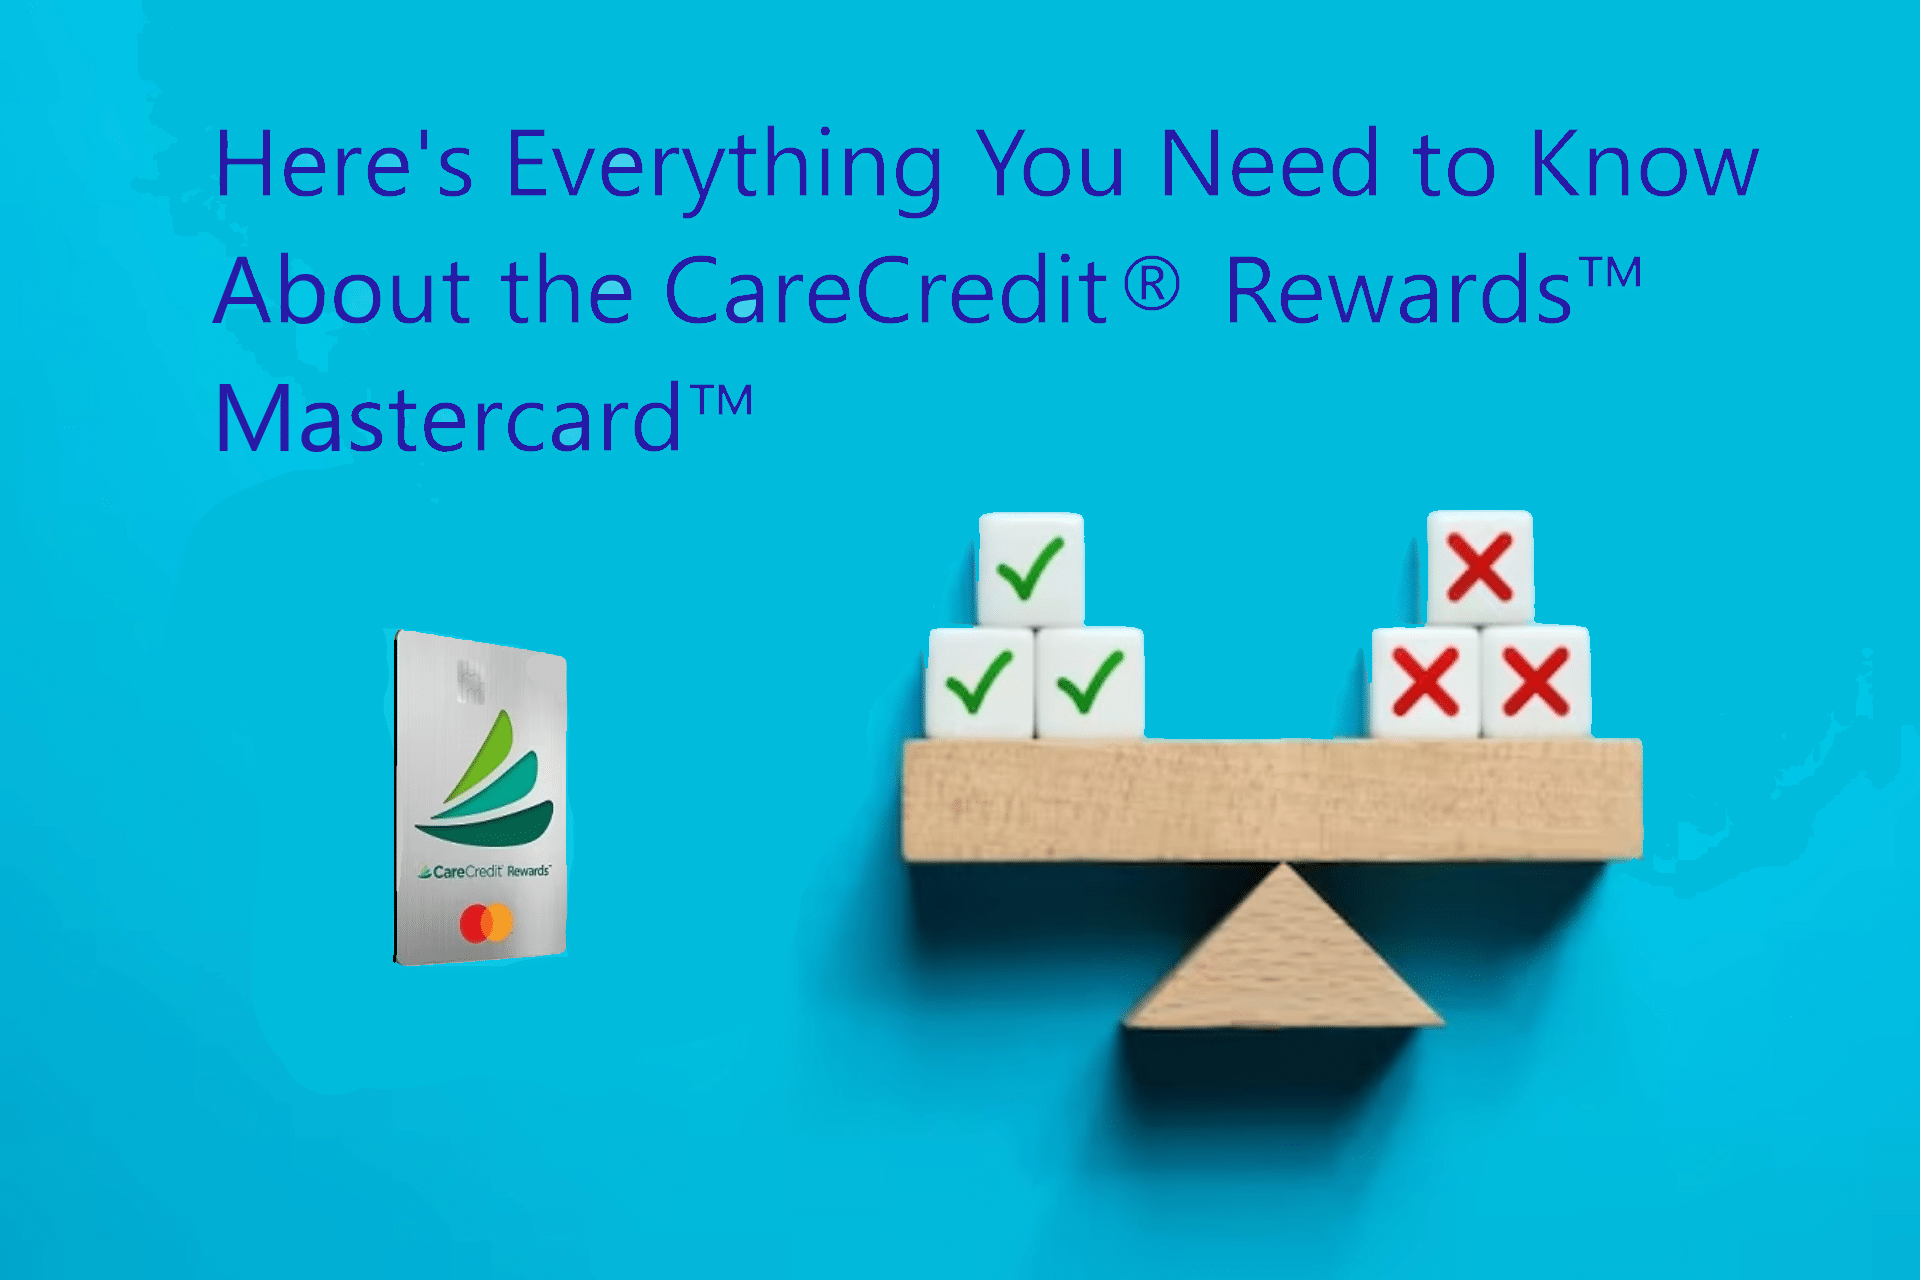 what are the beenfits and drawbacks of the carecredit mastercard?